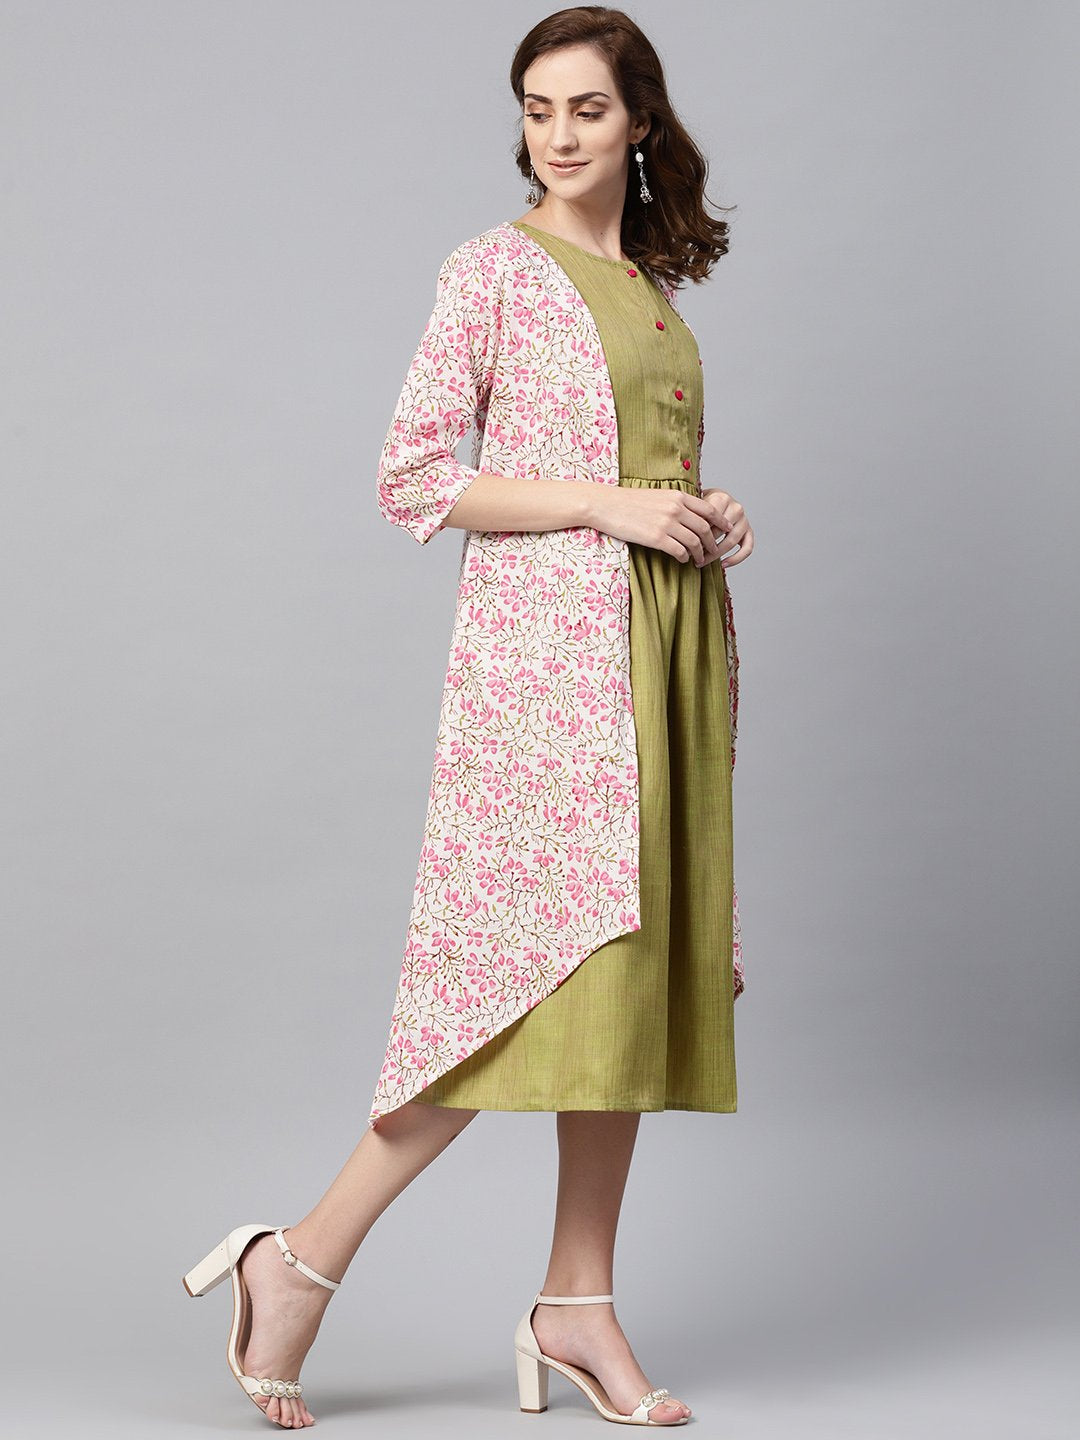 Women's Olive Green A-Line Dress With White Floral Printed Jacket - Nayo Clothing